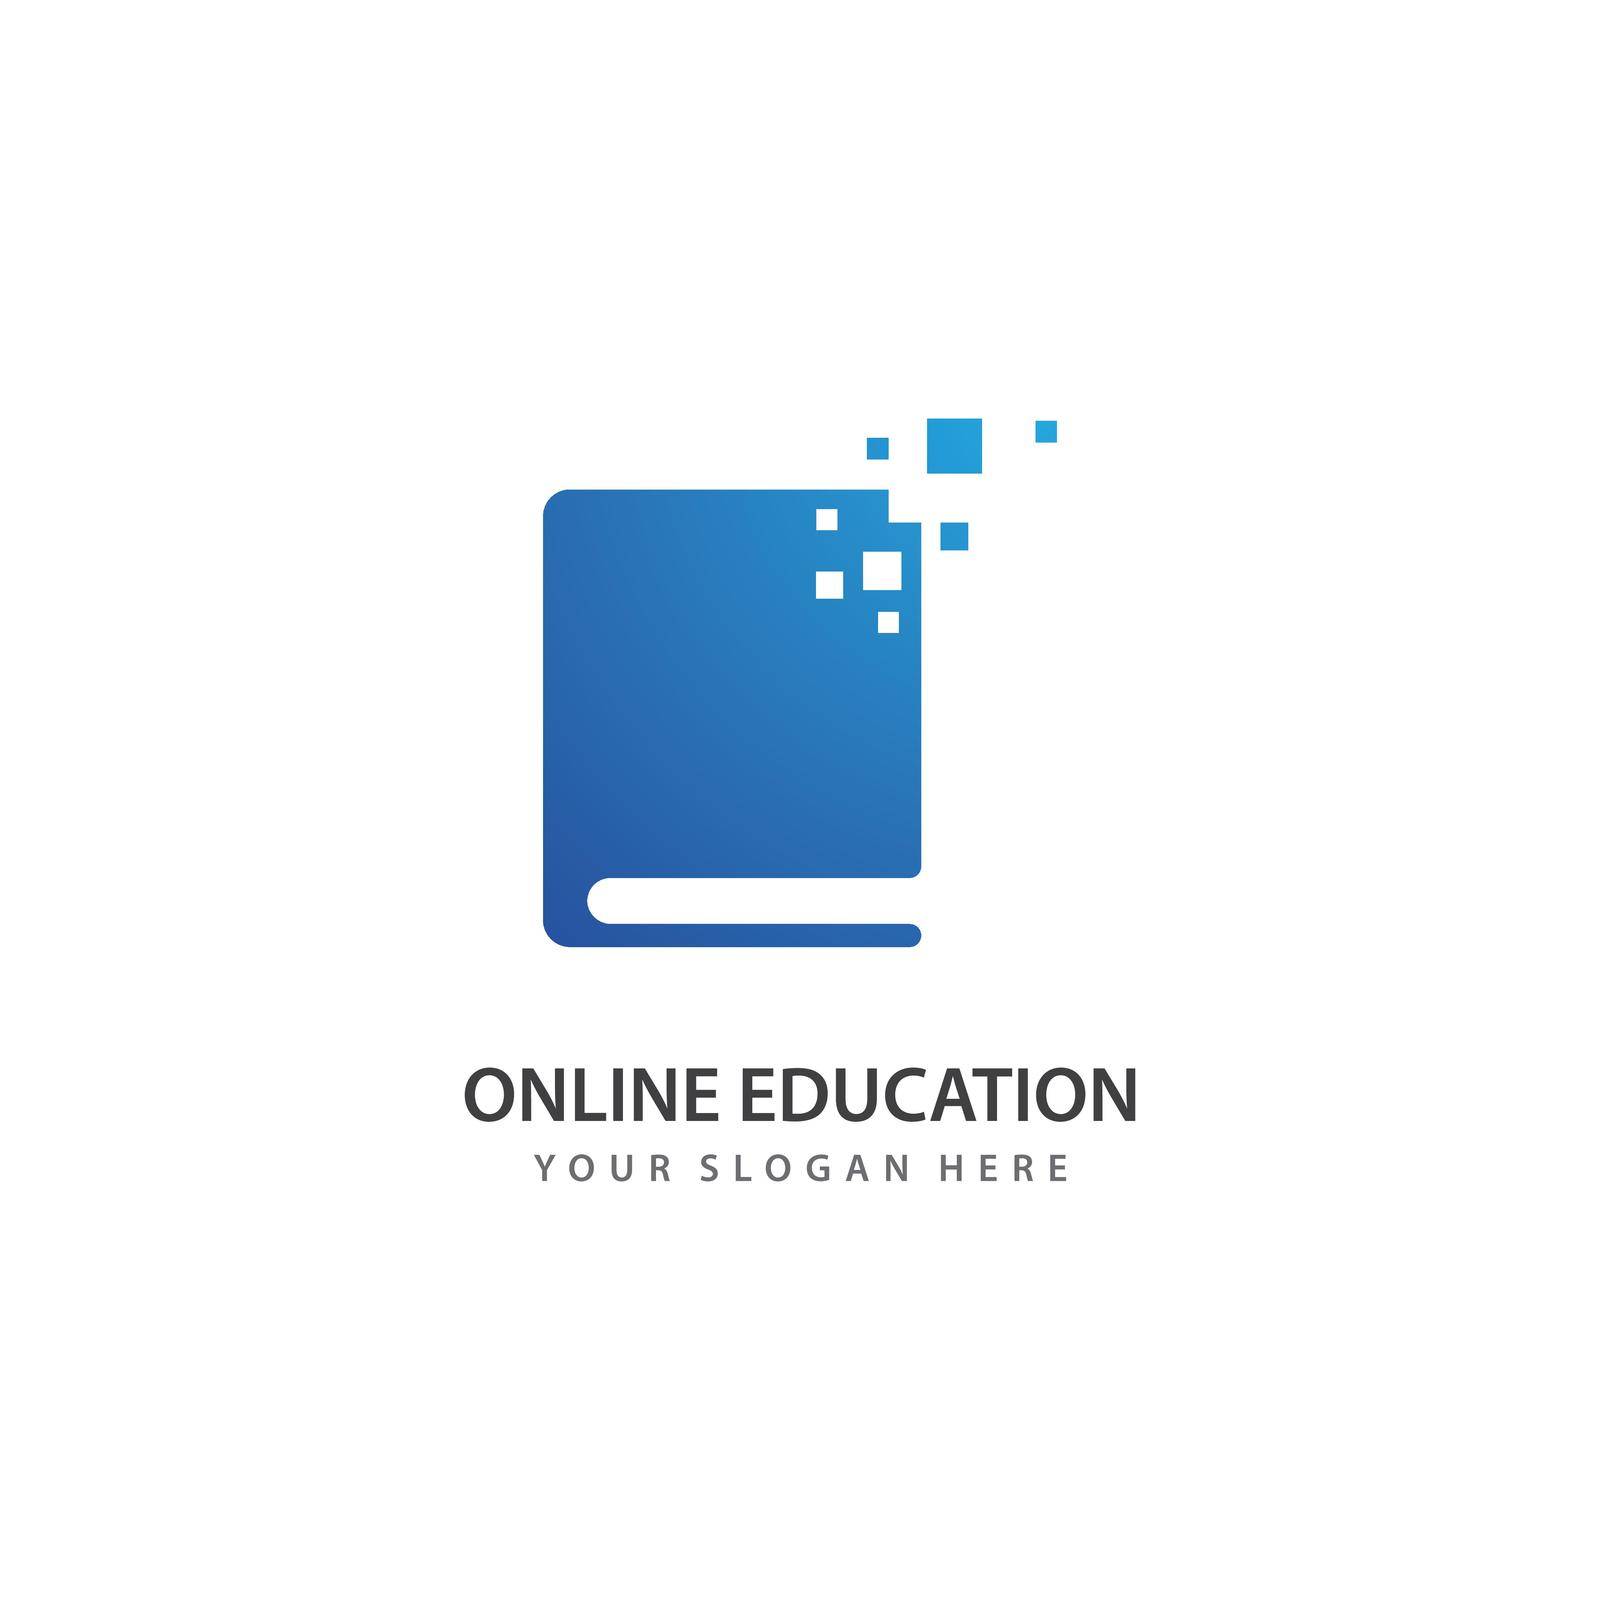 Online education by awk